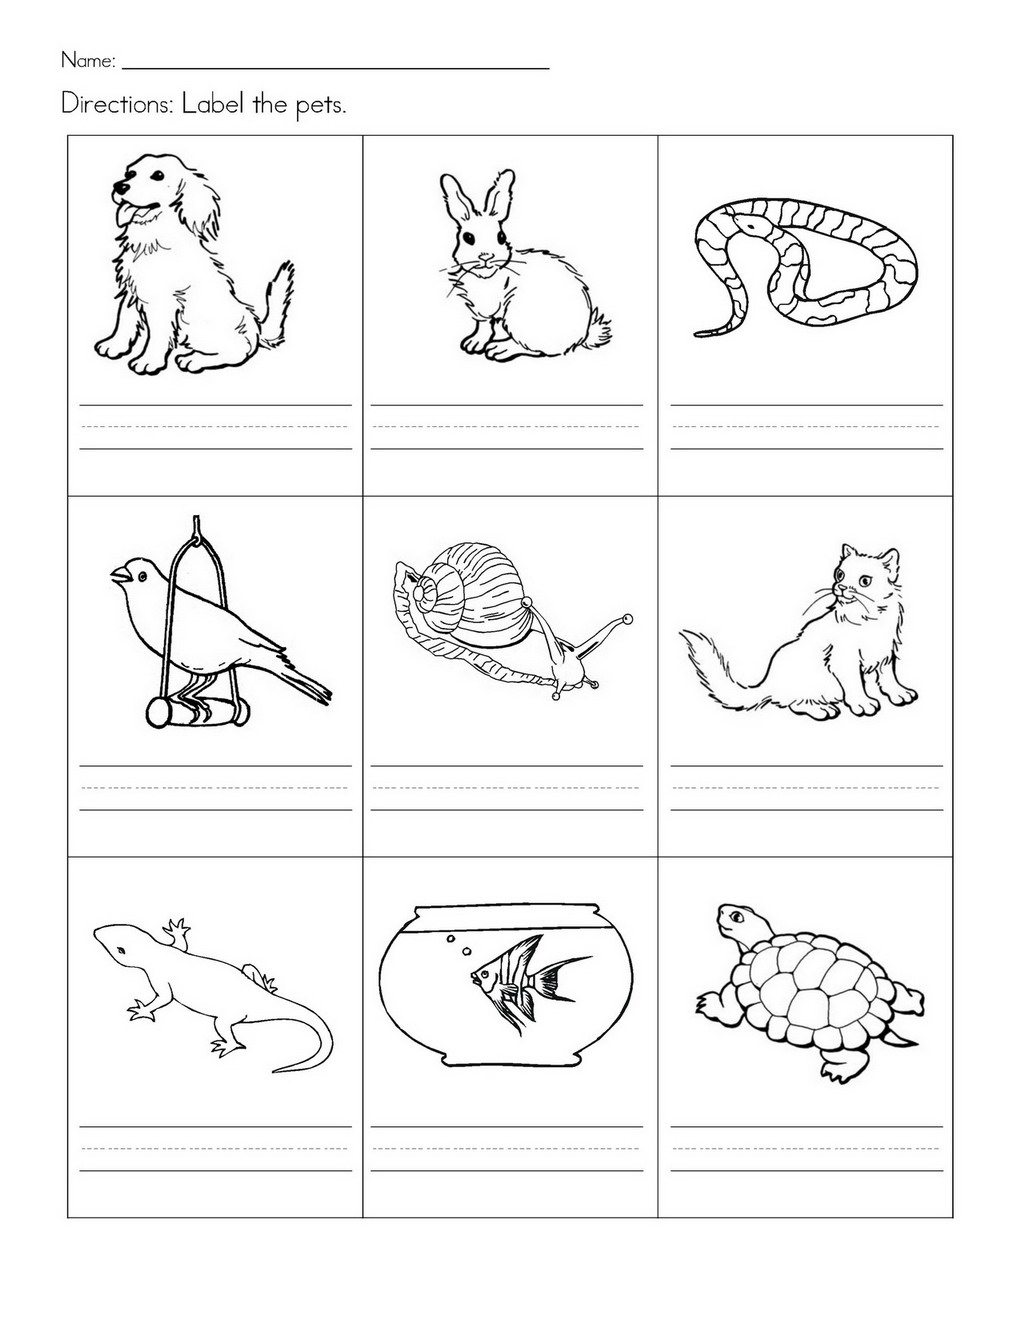 15 Best Images of Worksheets About Pets - Kenneth Cole, English House